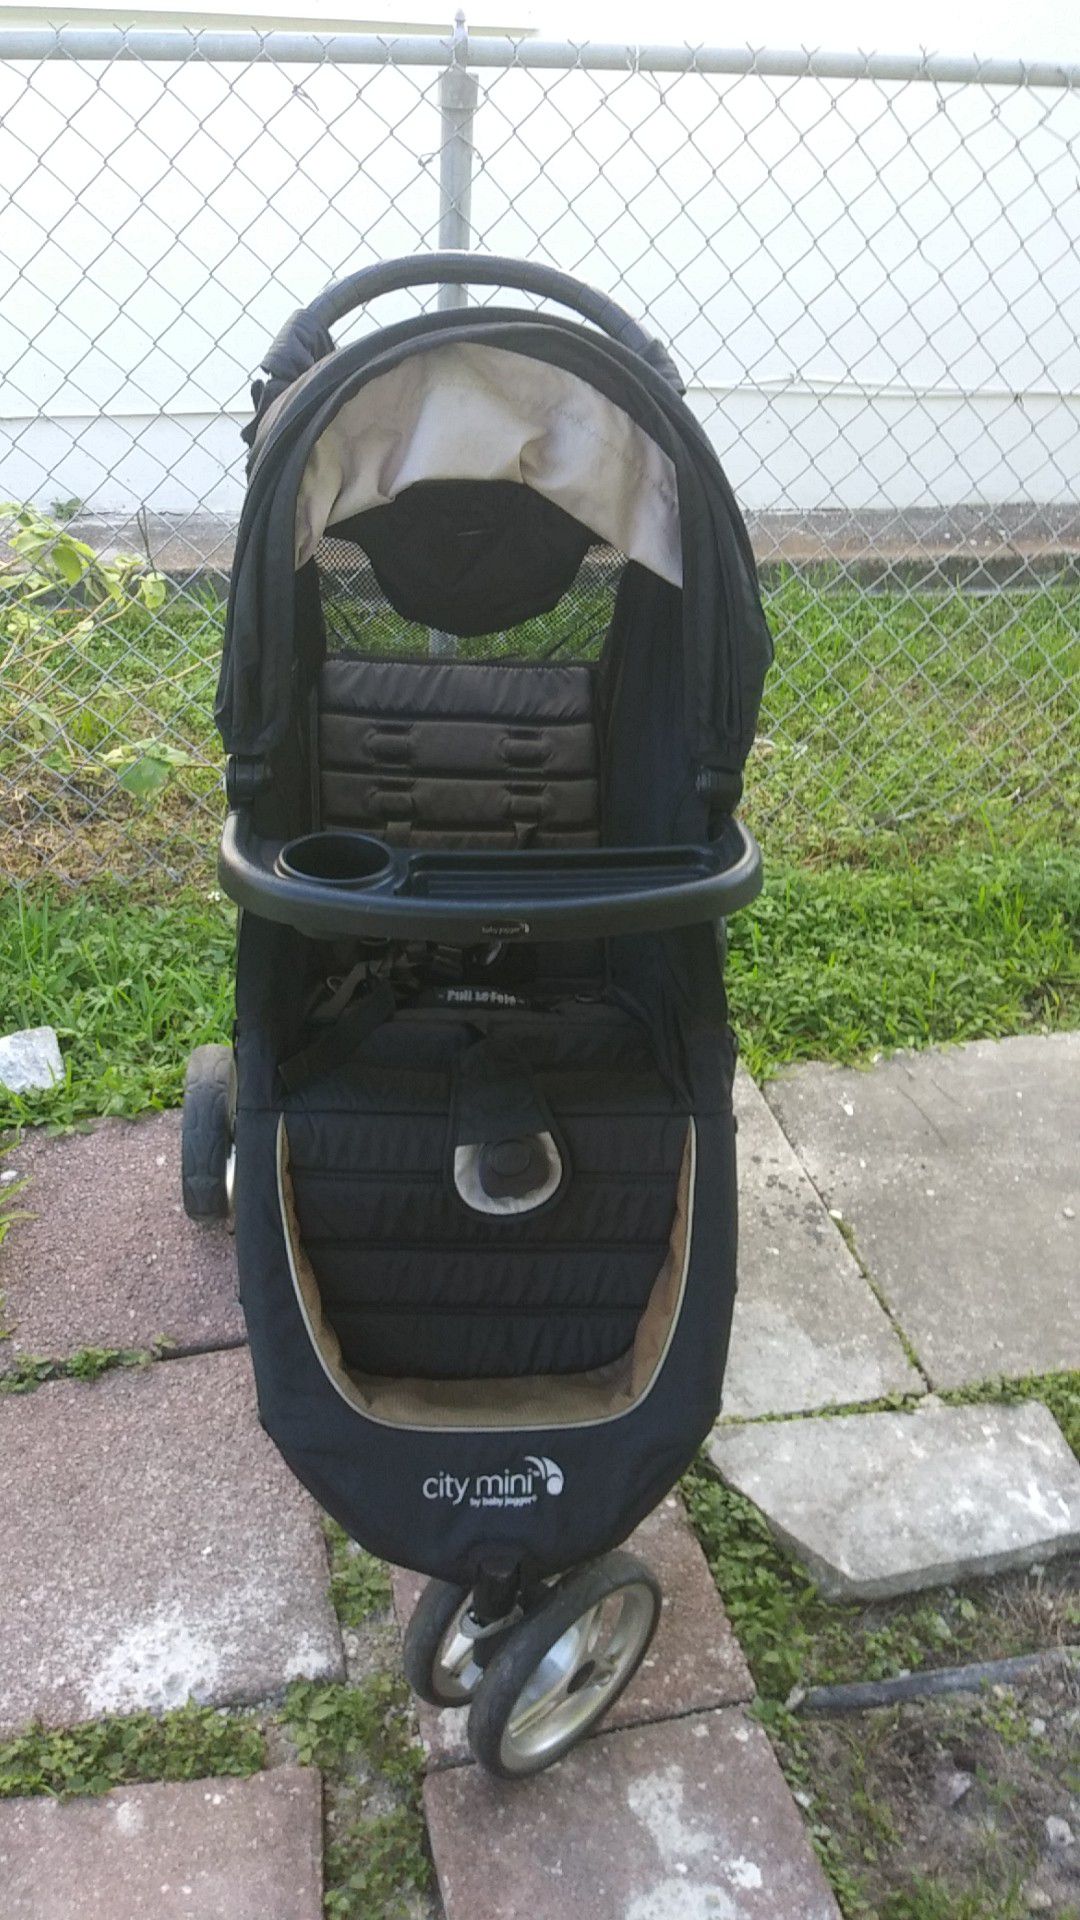 City Mini by Baby Jogger stroller